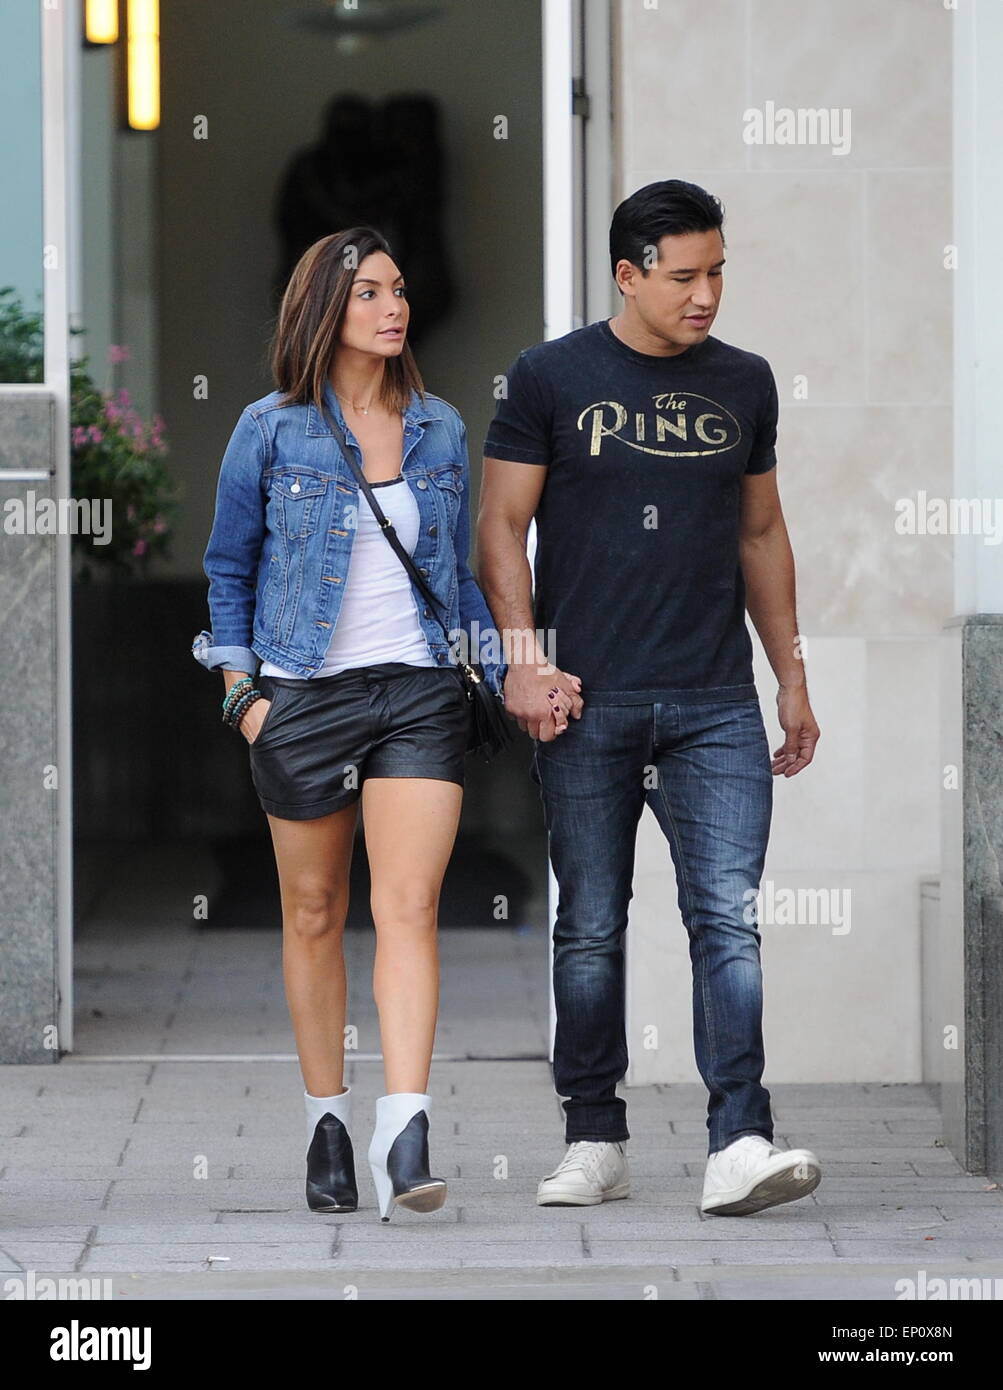 Mario Lopez spotted out holding hands with his wife Courtney Mazza  Featuring: Mario Lopez,Courtney Mazza Where: Beverly Hills, California, United States When: 07 Nov 2014 Credit: Cousart/JFXimages/WENN.com Stock Photo